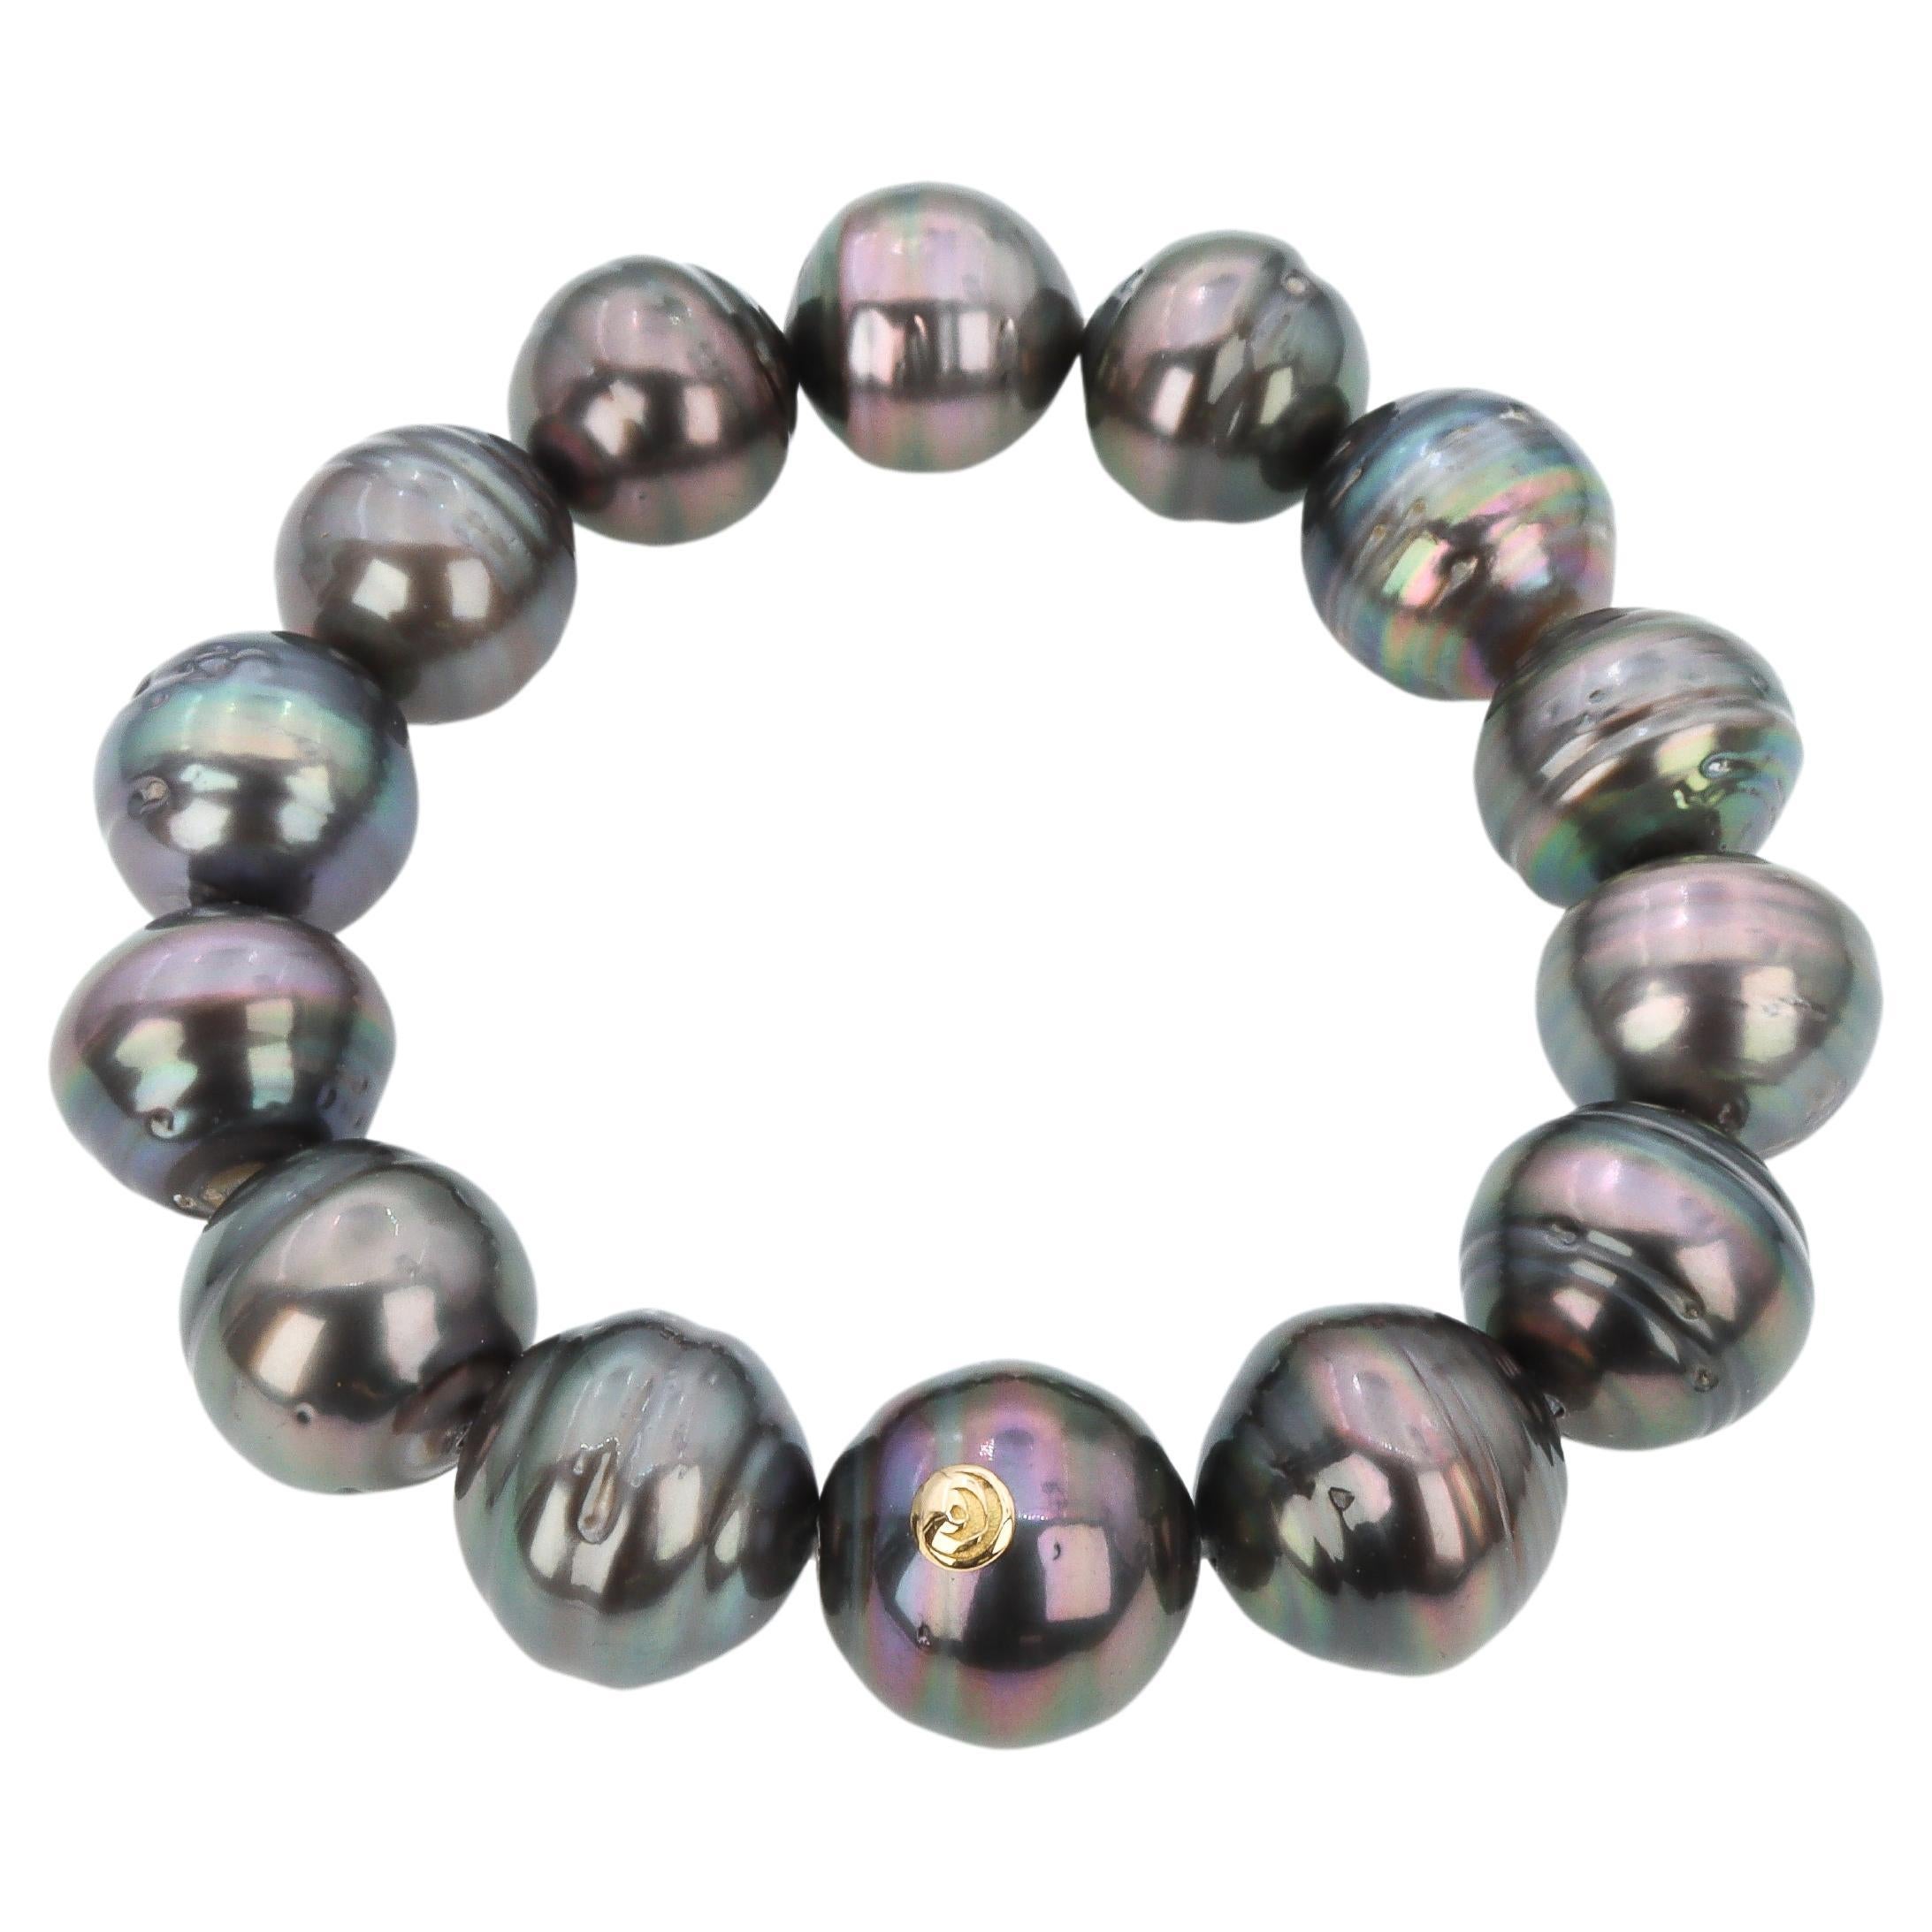 Aventina-Spencer / Marc'harit Conscious Circled Tahitian Pearl Bracelet For Sale